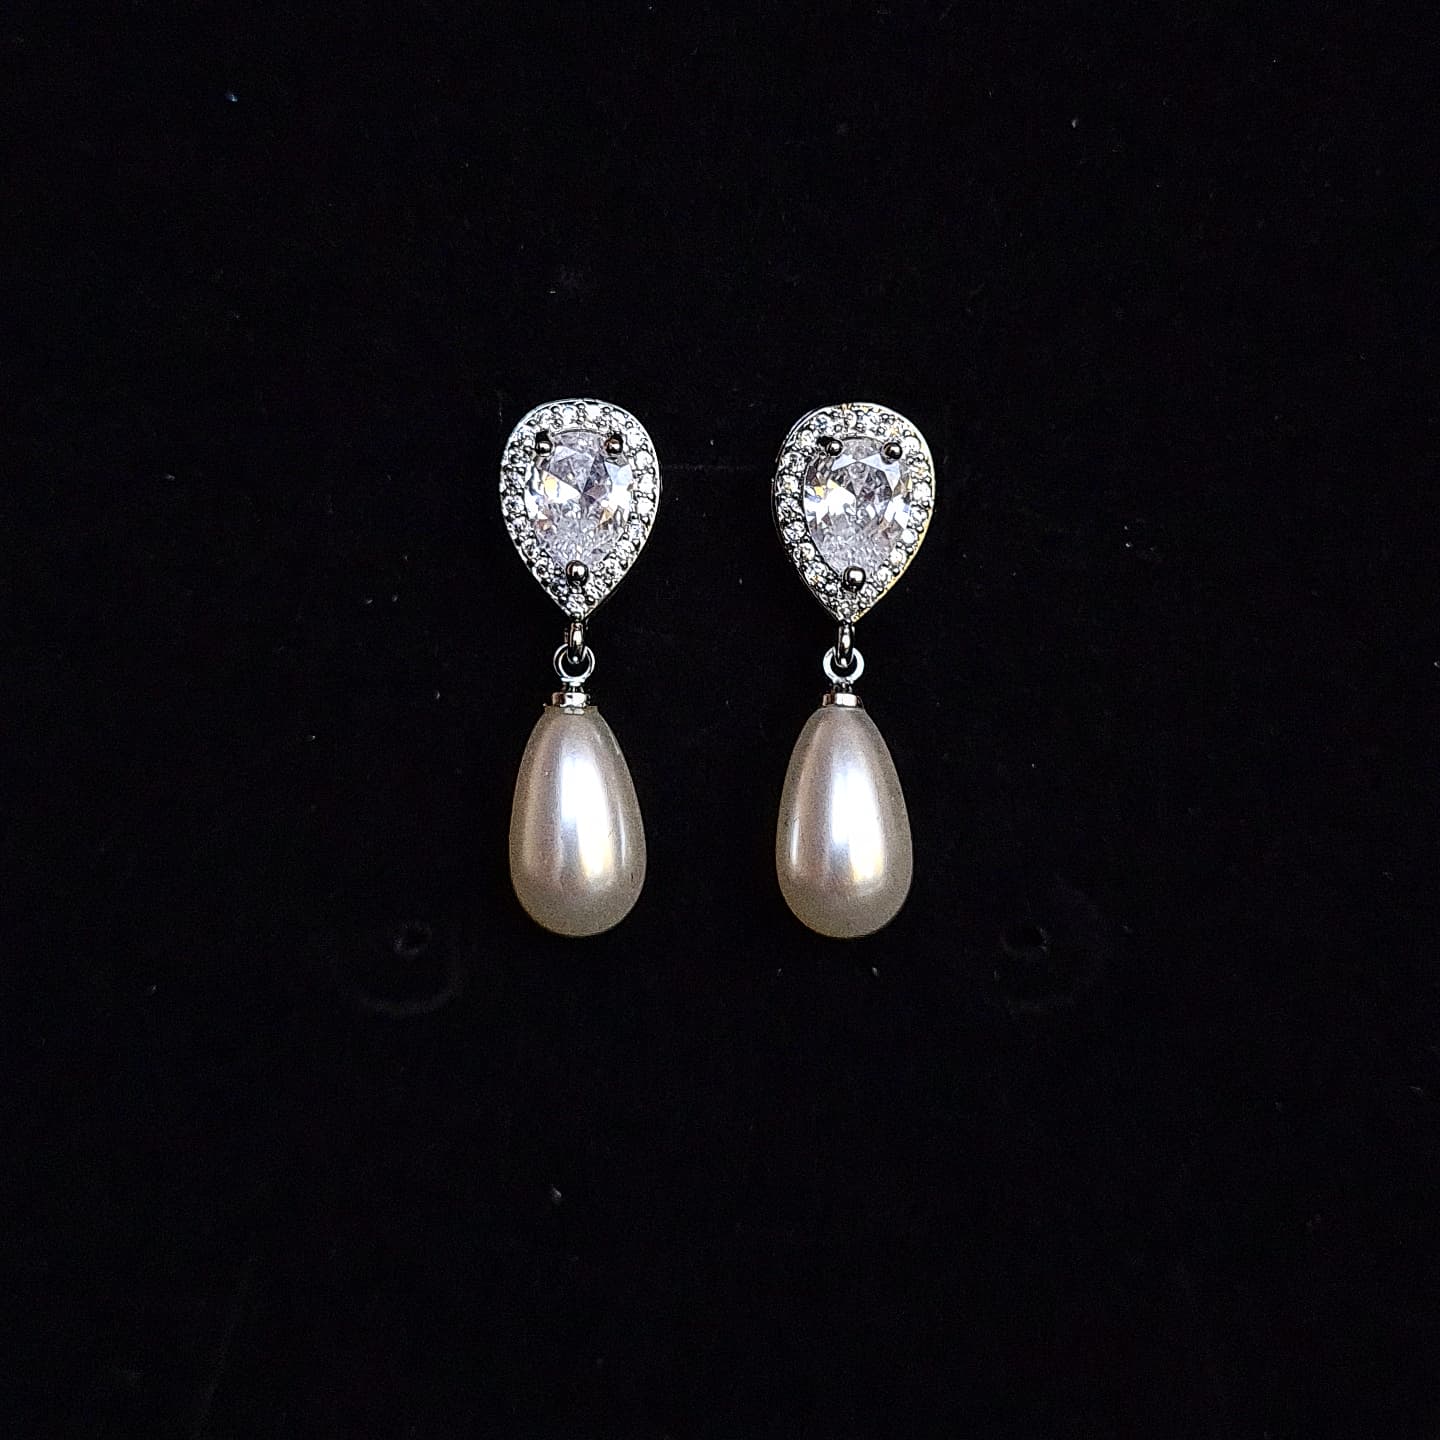 A pair of silver earrings with pearls and diamonds on a black box. The earrings are teardrop-shaped and have a simple, elegant design. The pearls are white and the diamonds are clear. 